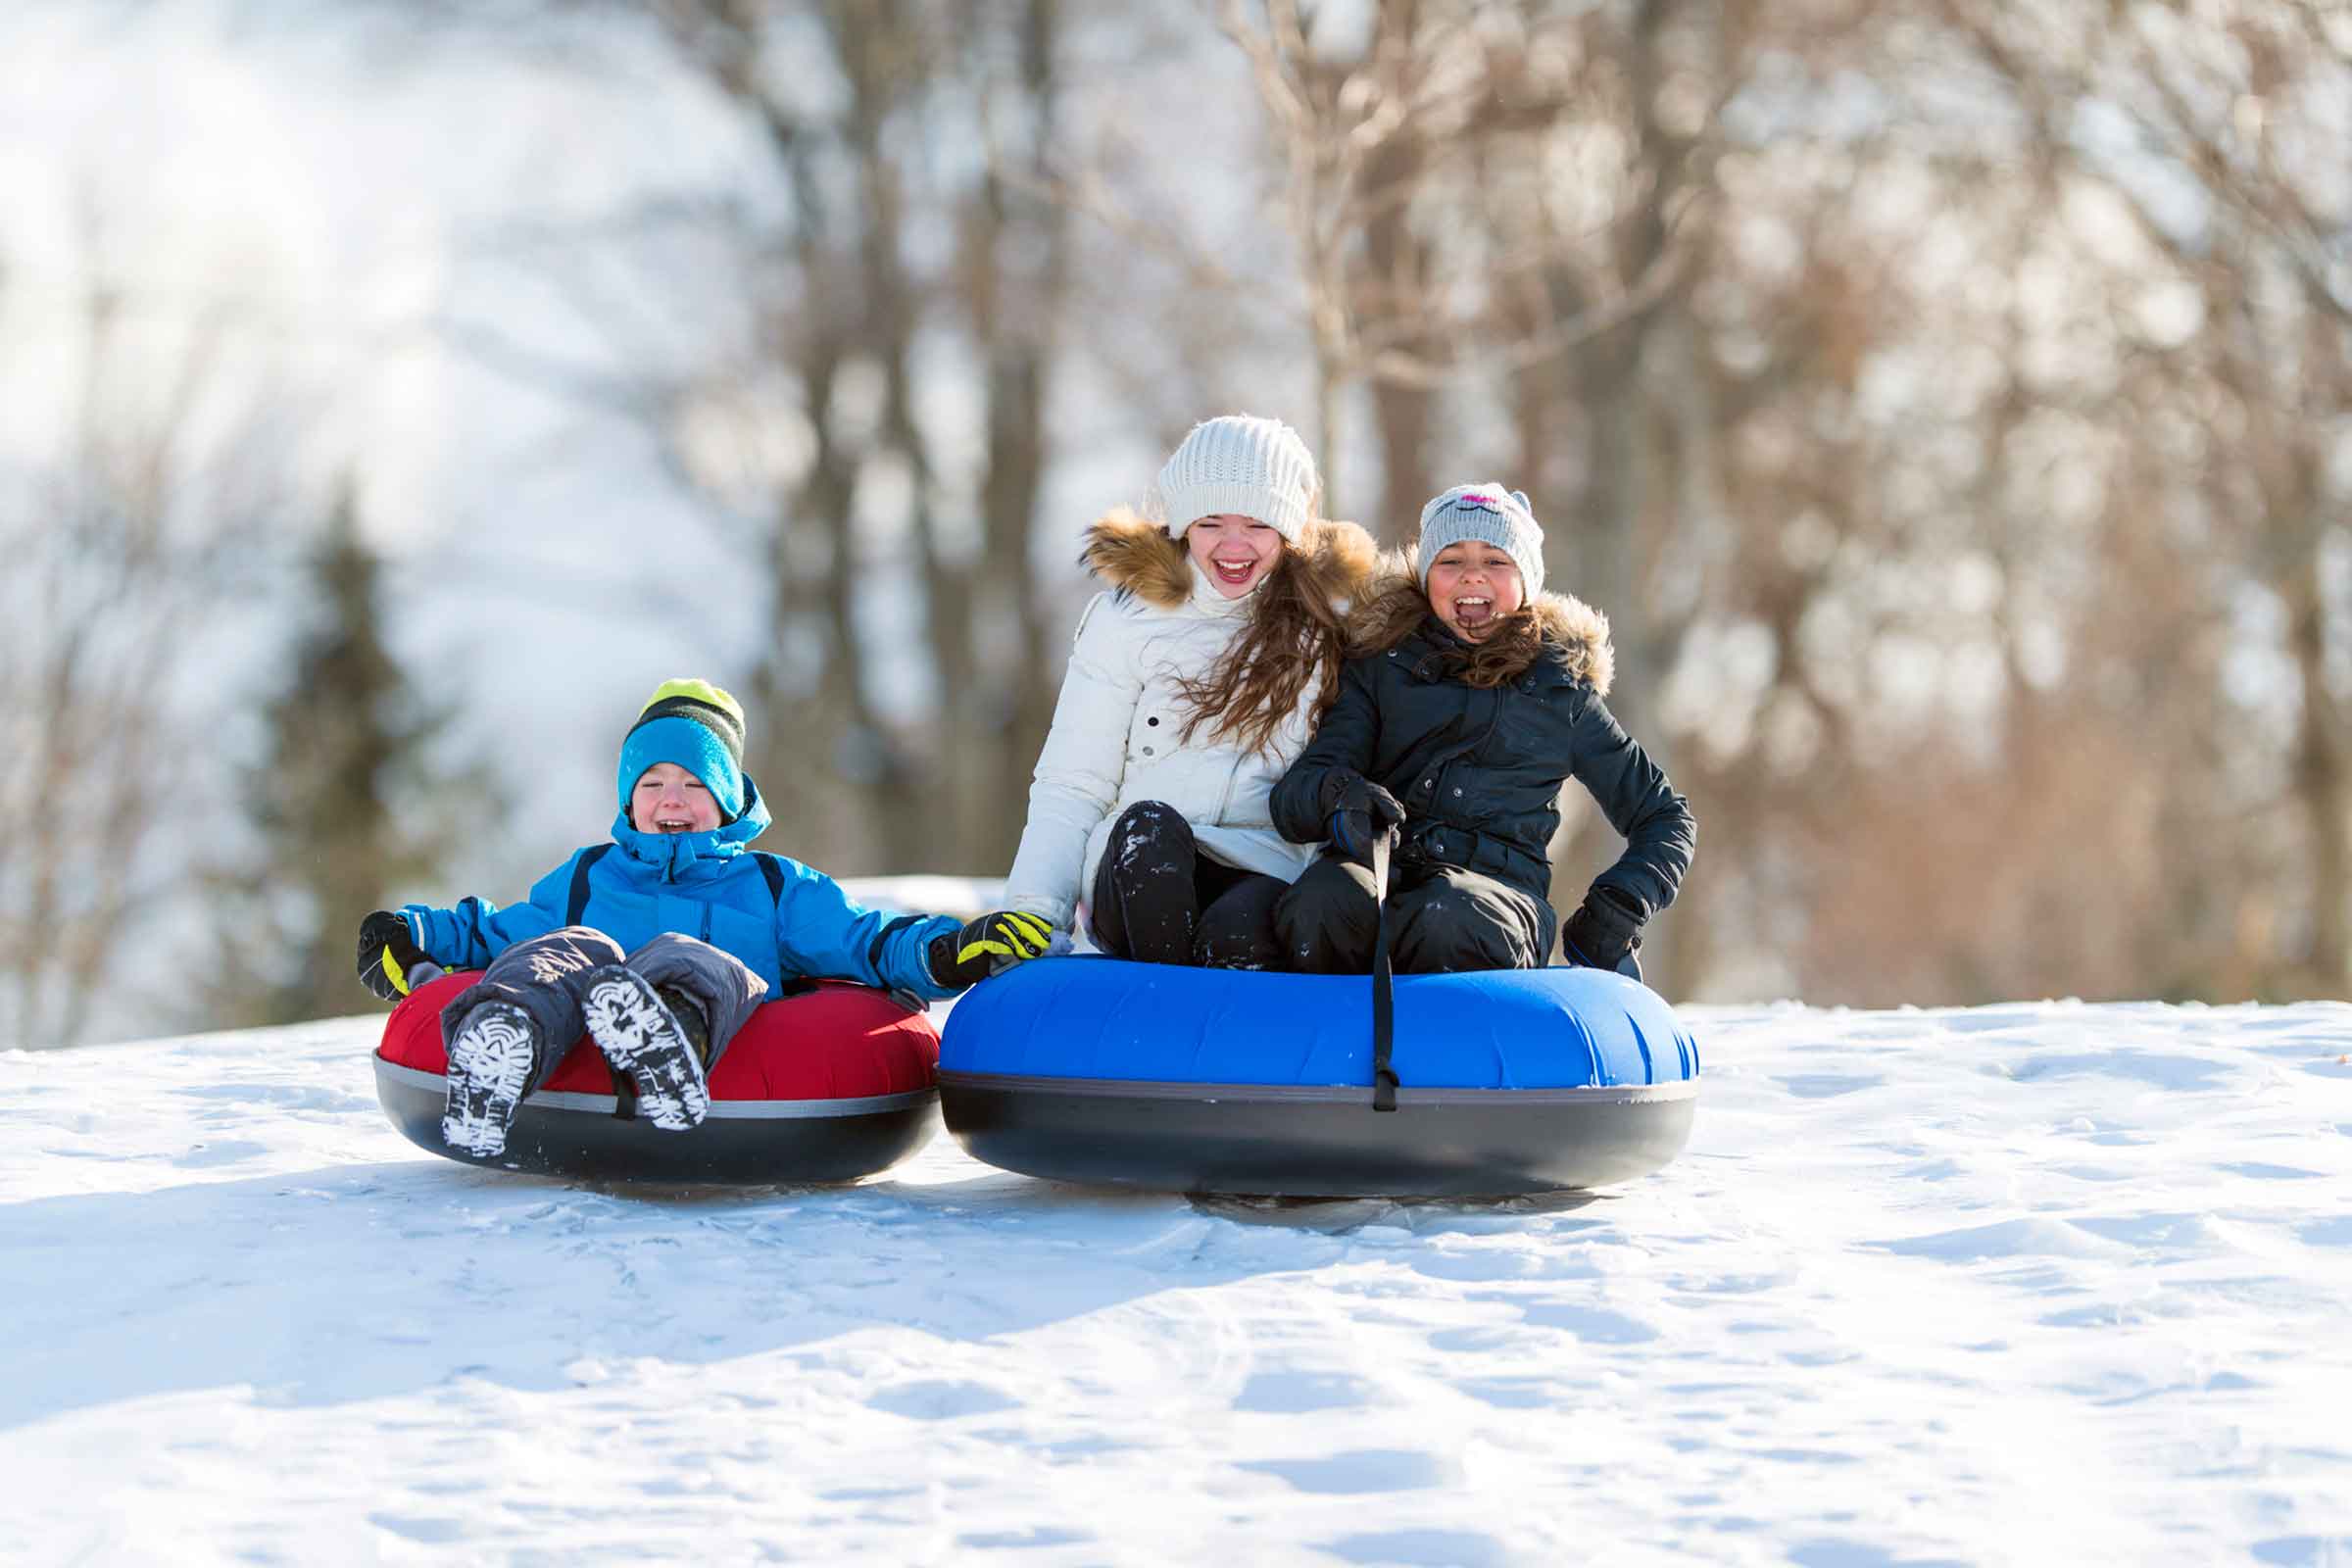 Snow Day Activities for Your Whole Family | Reader's Digest